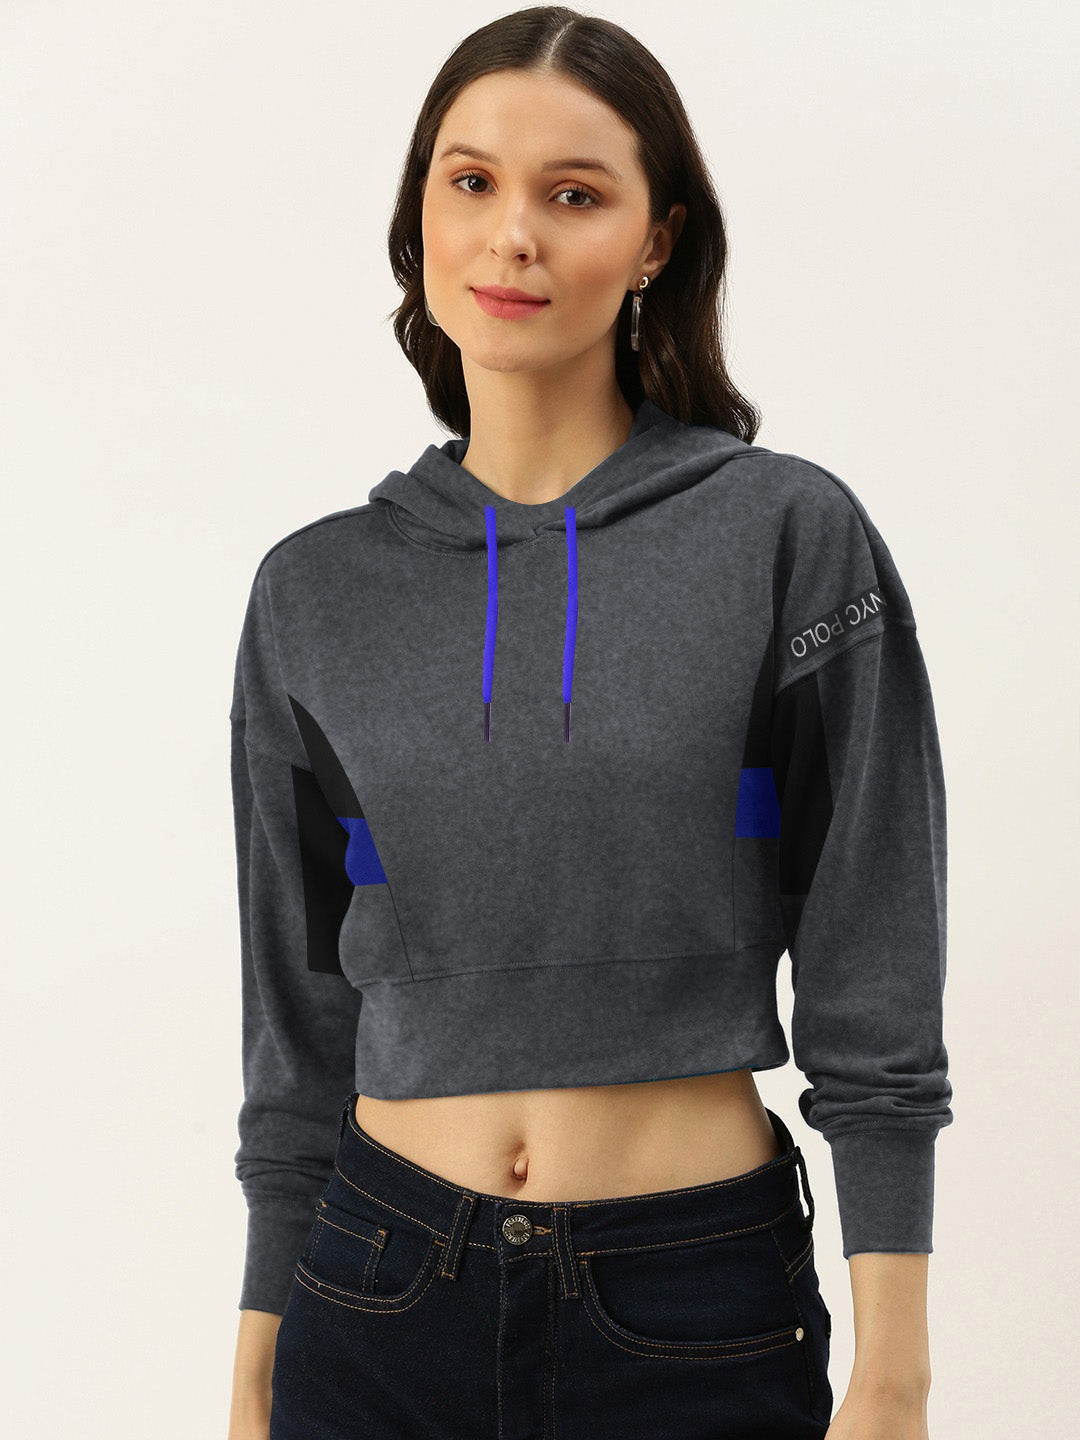 NYC Polo Fleece Short Pullover Hoodie For Ladies-Charcoal Melange-BE659